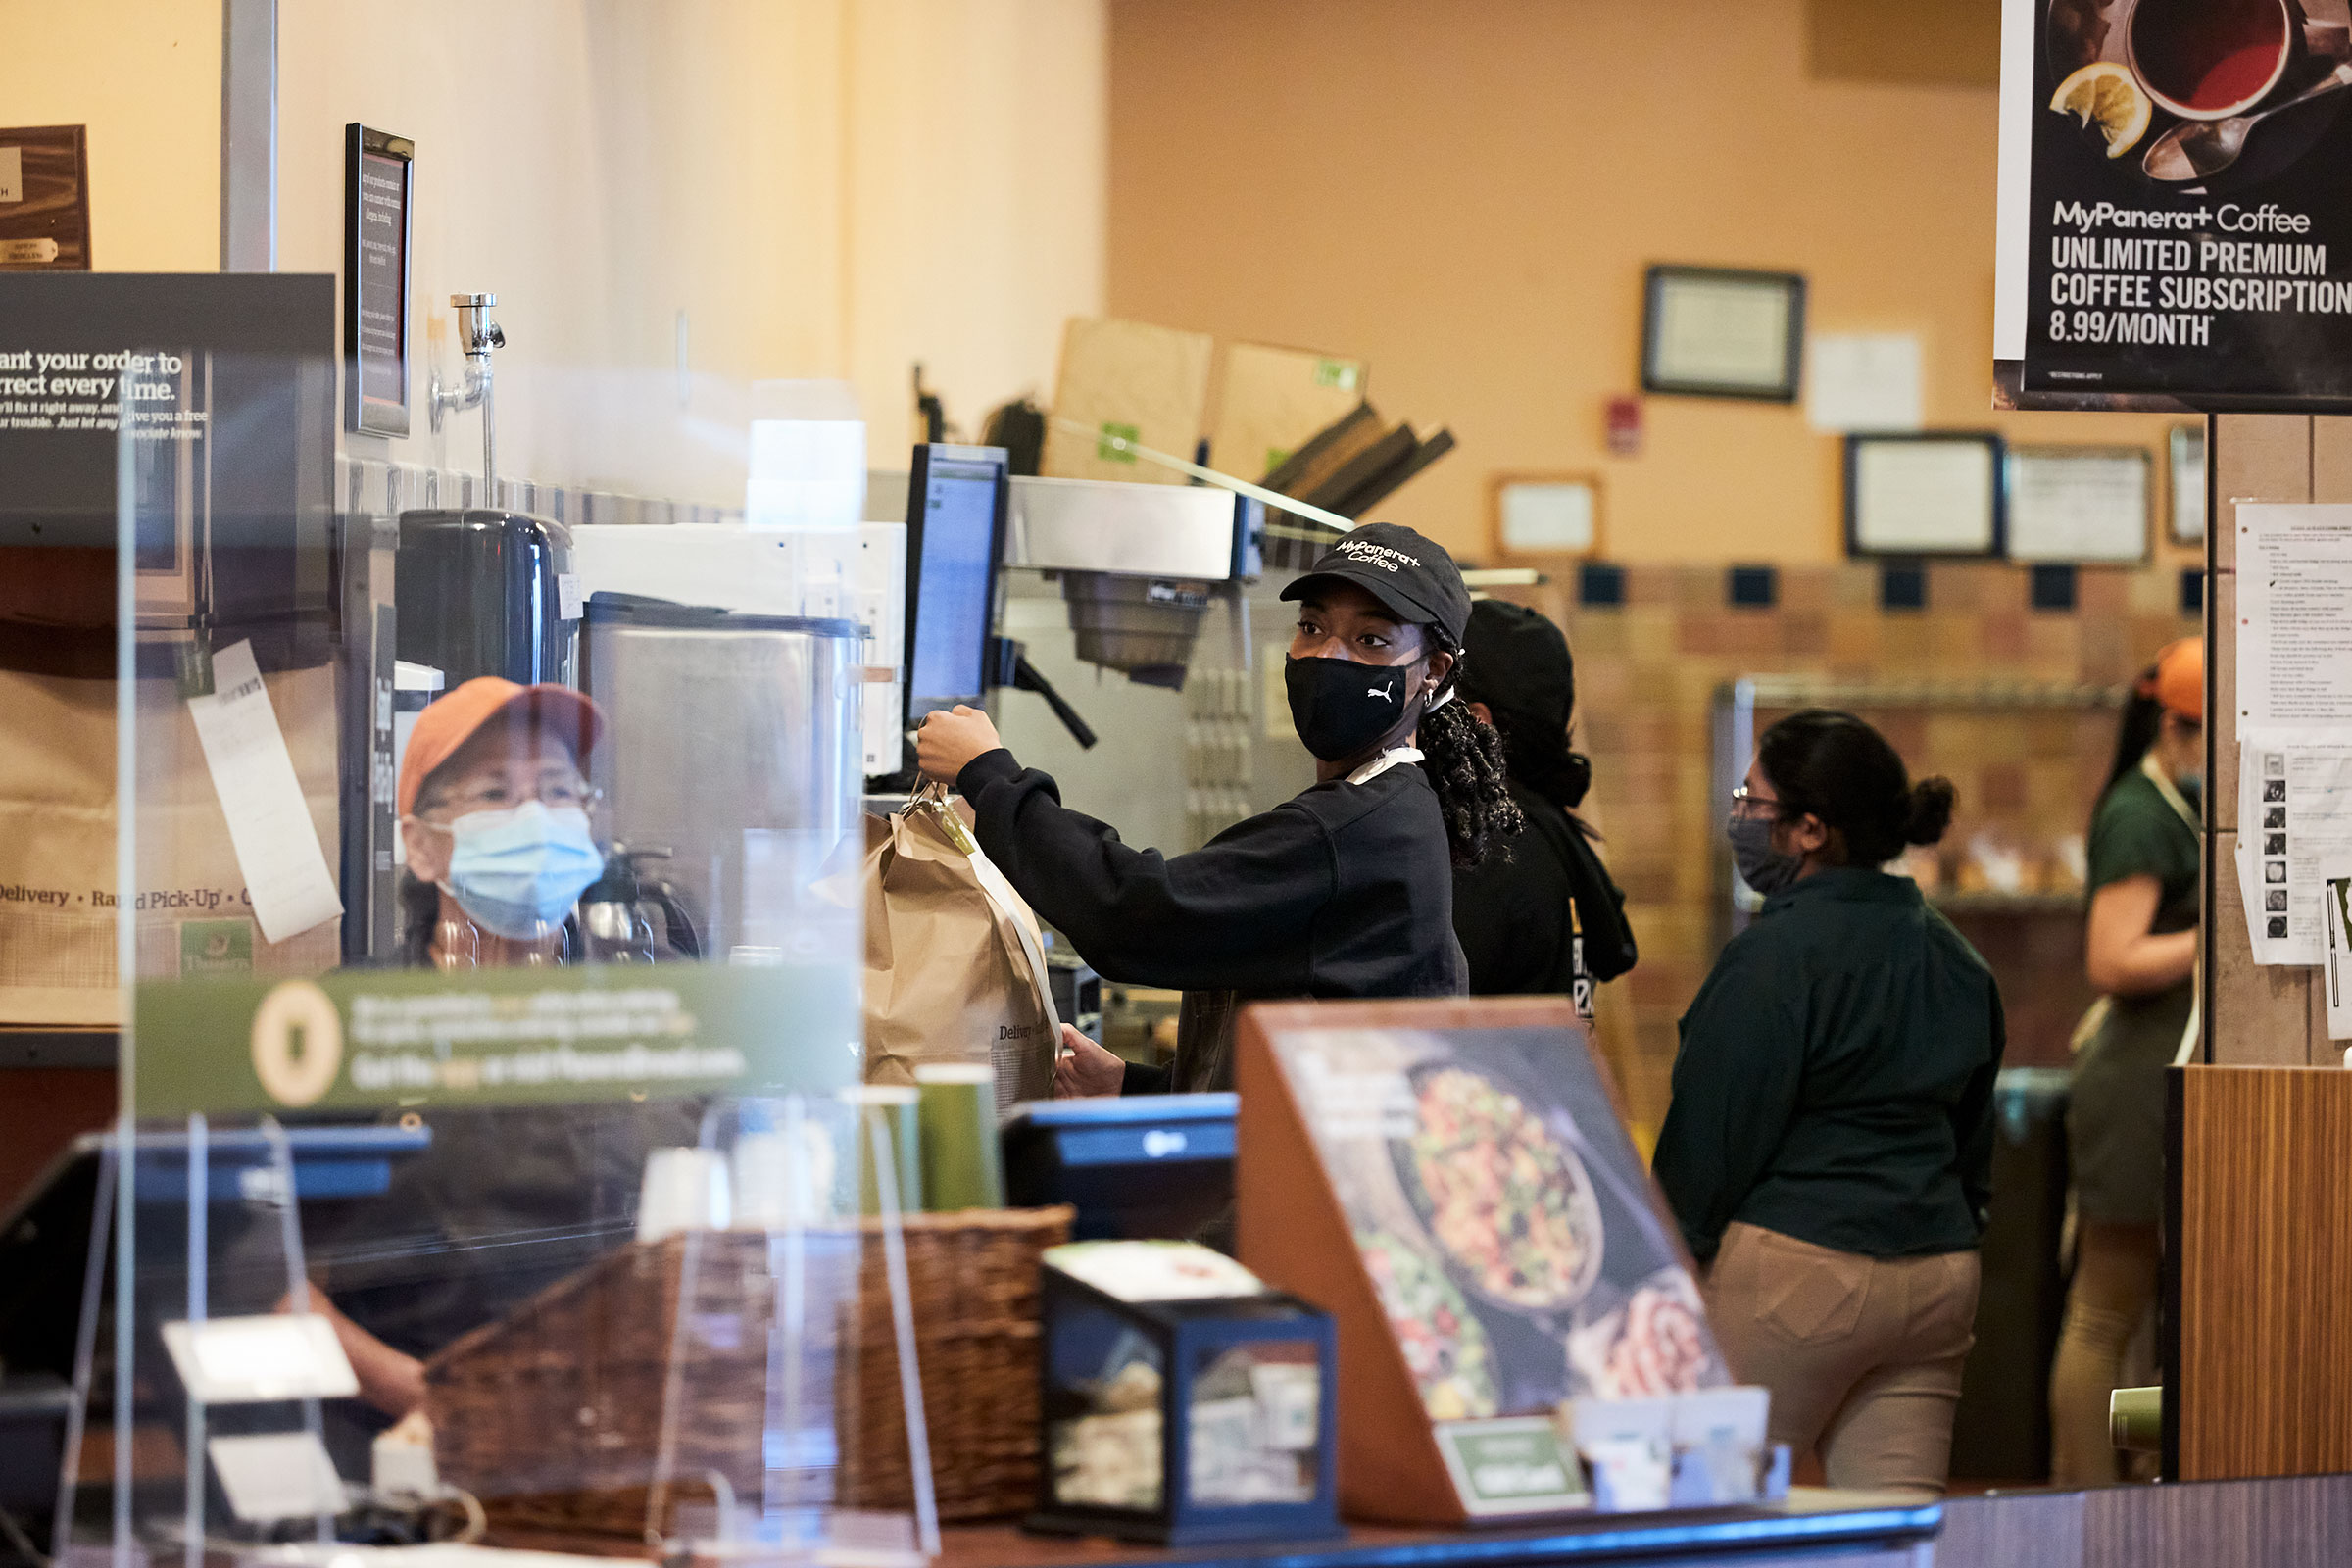 Joseph readies a takeout order at Panera Bread café in Bay Shore, N.Y.